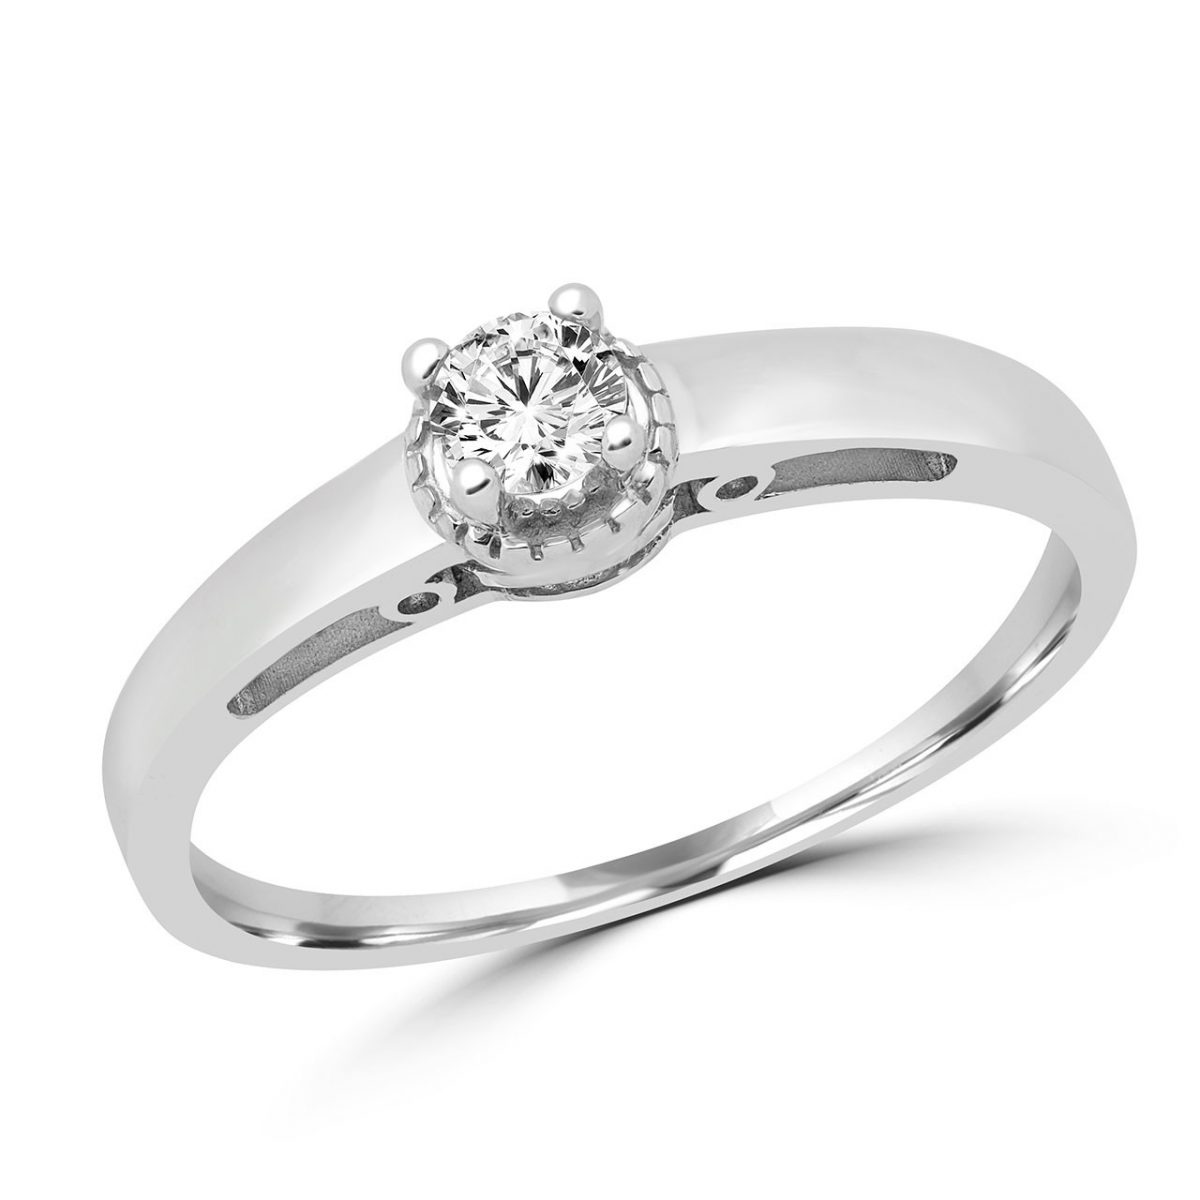 High class solitaire engagement ring 10k white gold